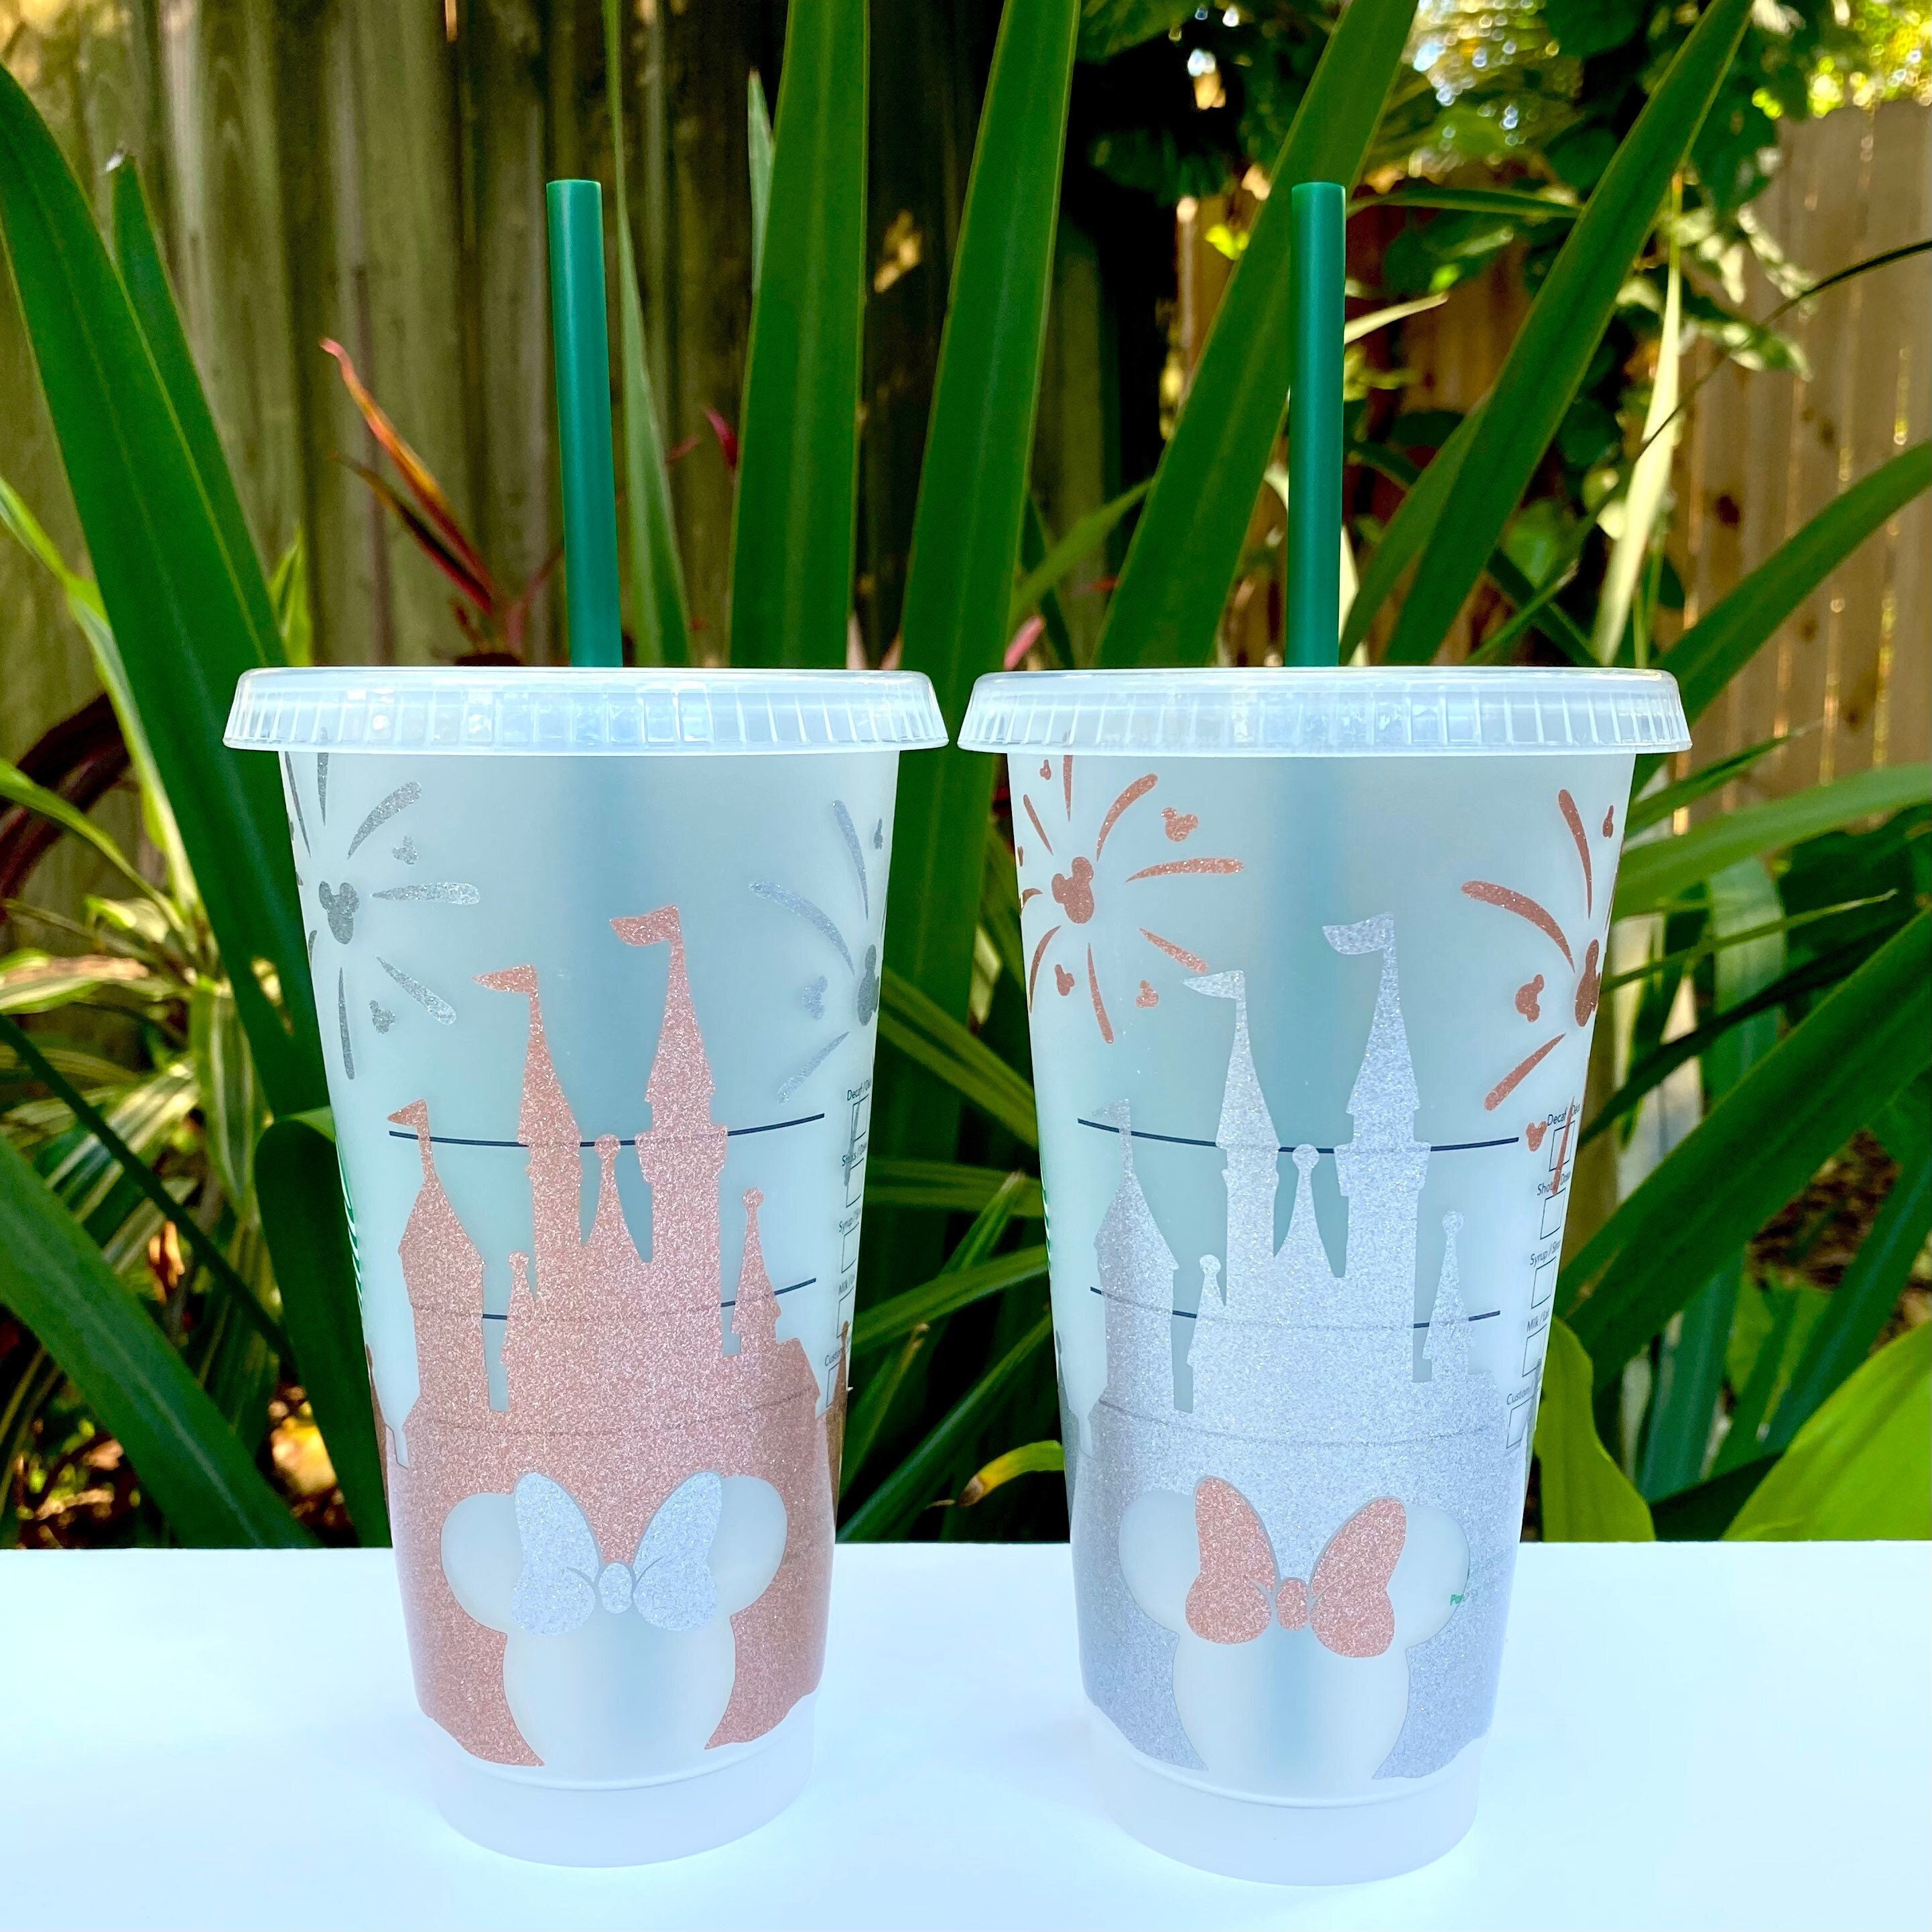 Enchanted Rose and Castle Cold Cup  Custom starbucks cup, Enchanted rose, Disney  starbucks